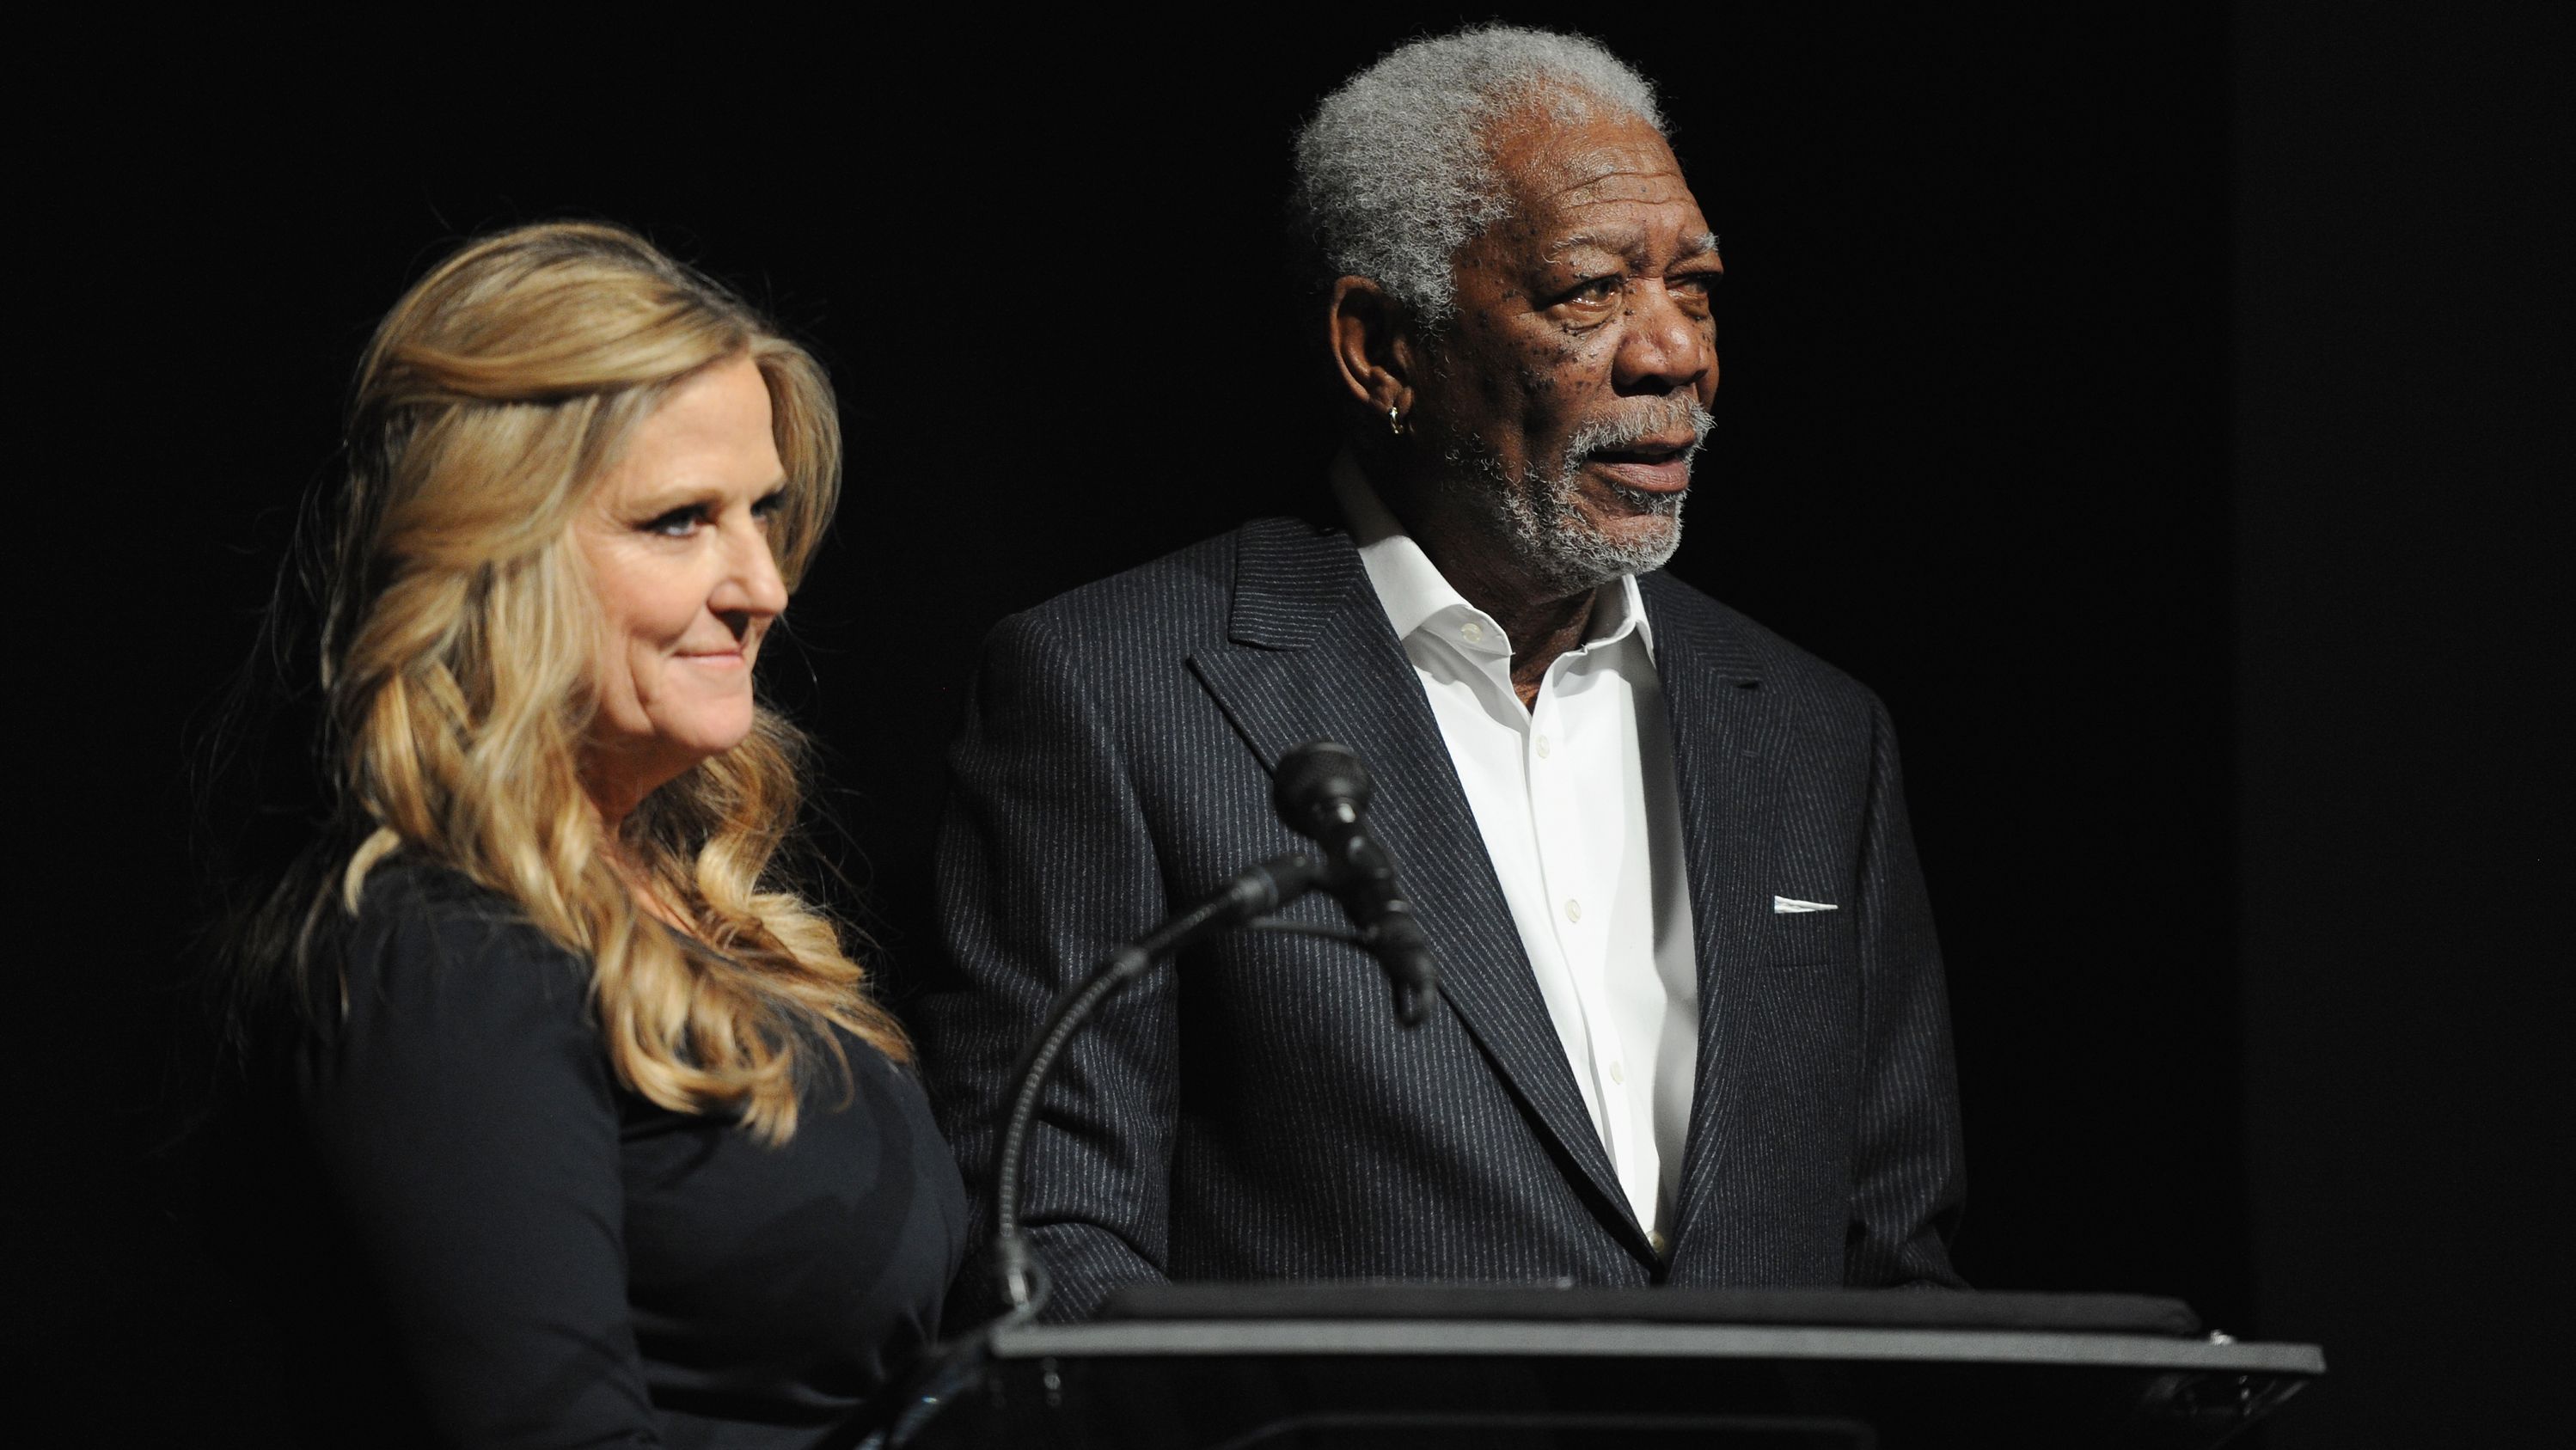 Morgan Freeman and Lori McCreary, his business partner, speak at an event in New York City in 2016. 